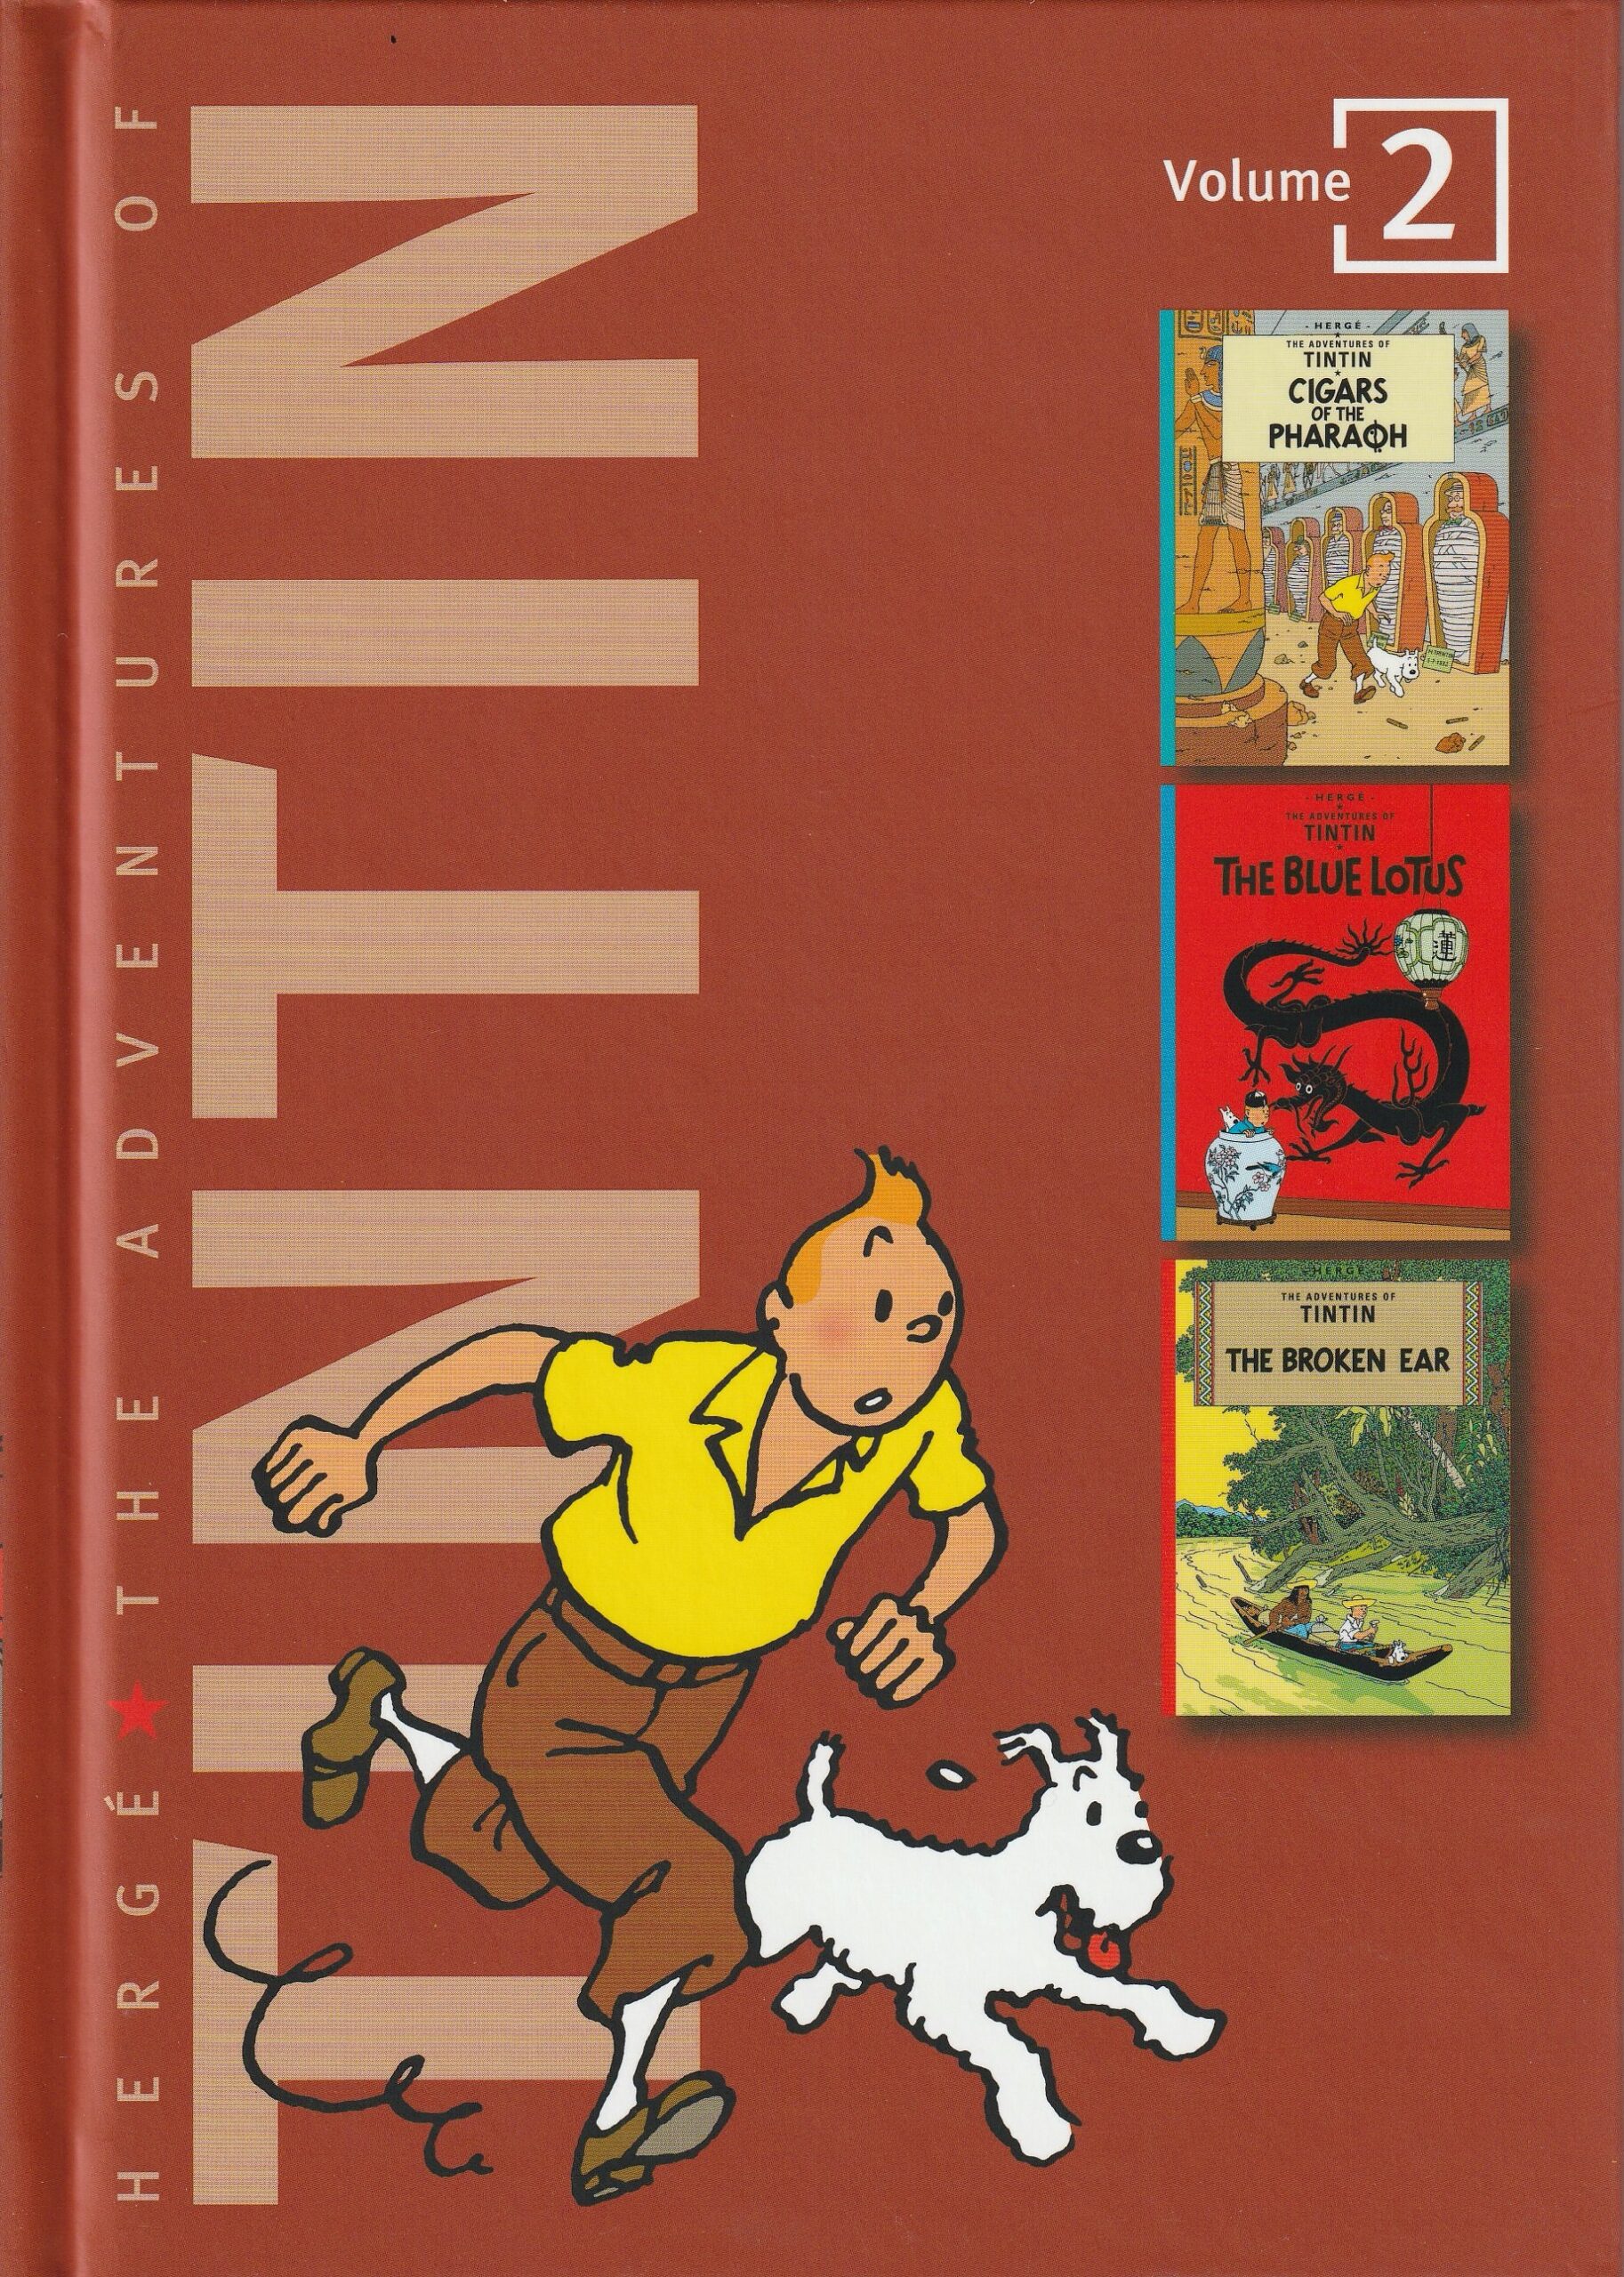 The Adventures of Tintin Volume 2 by Hergé